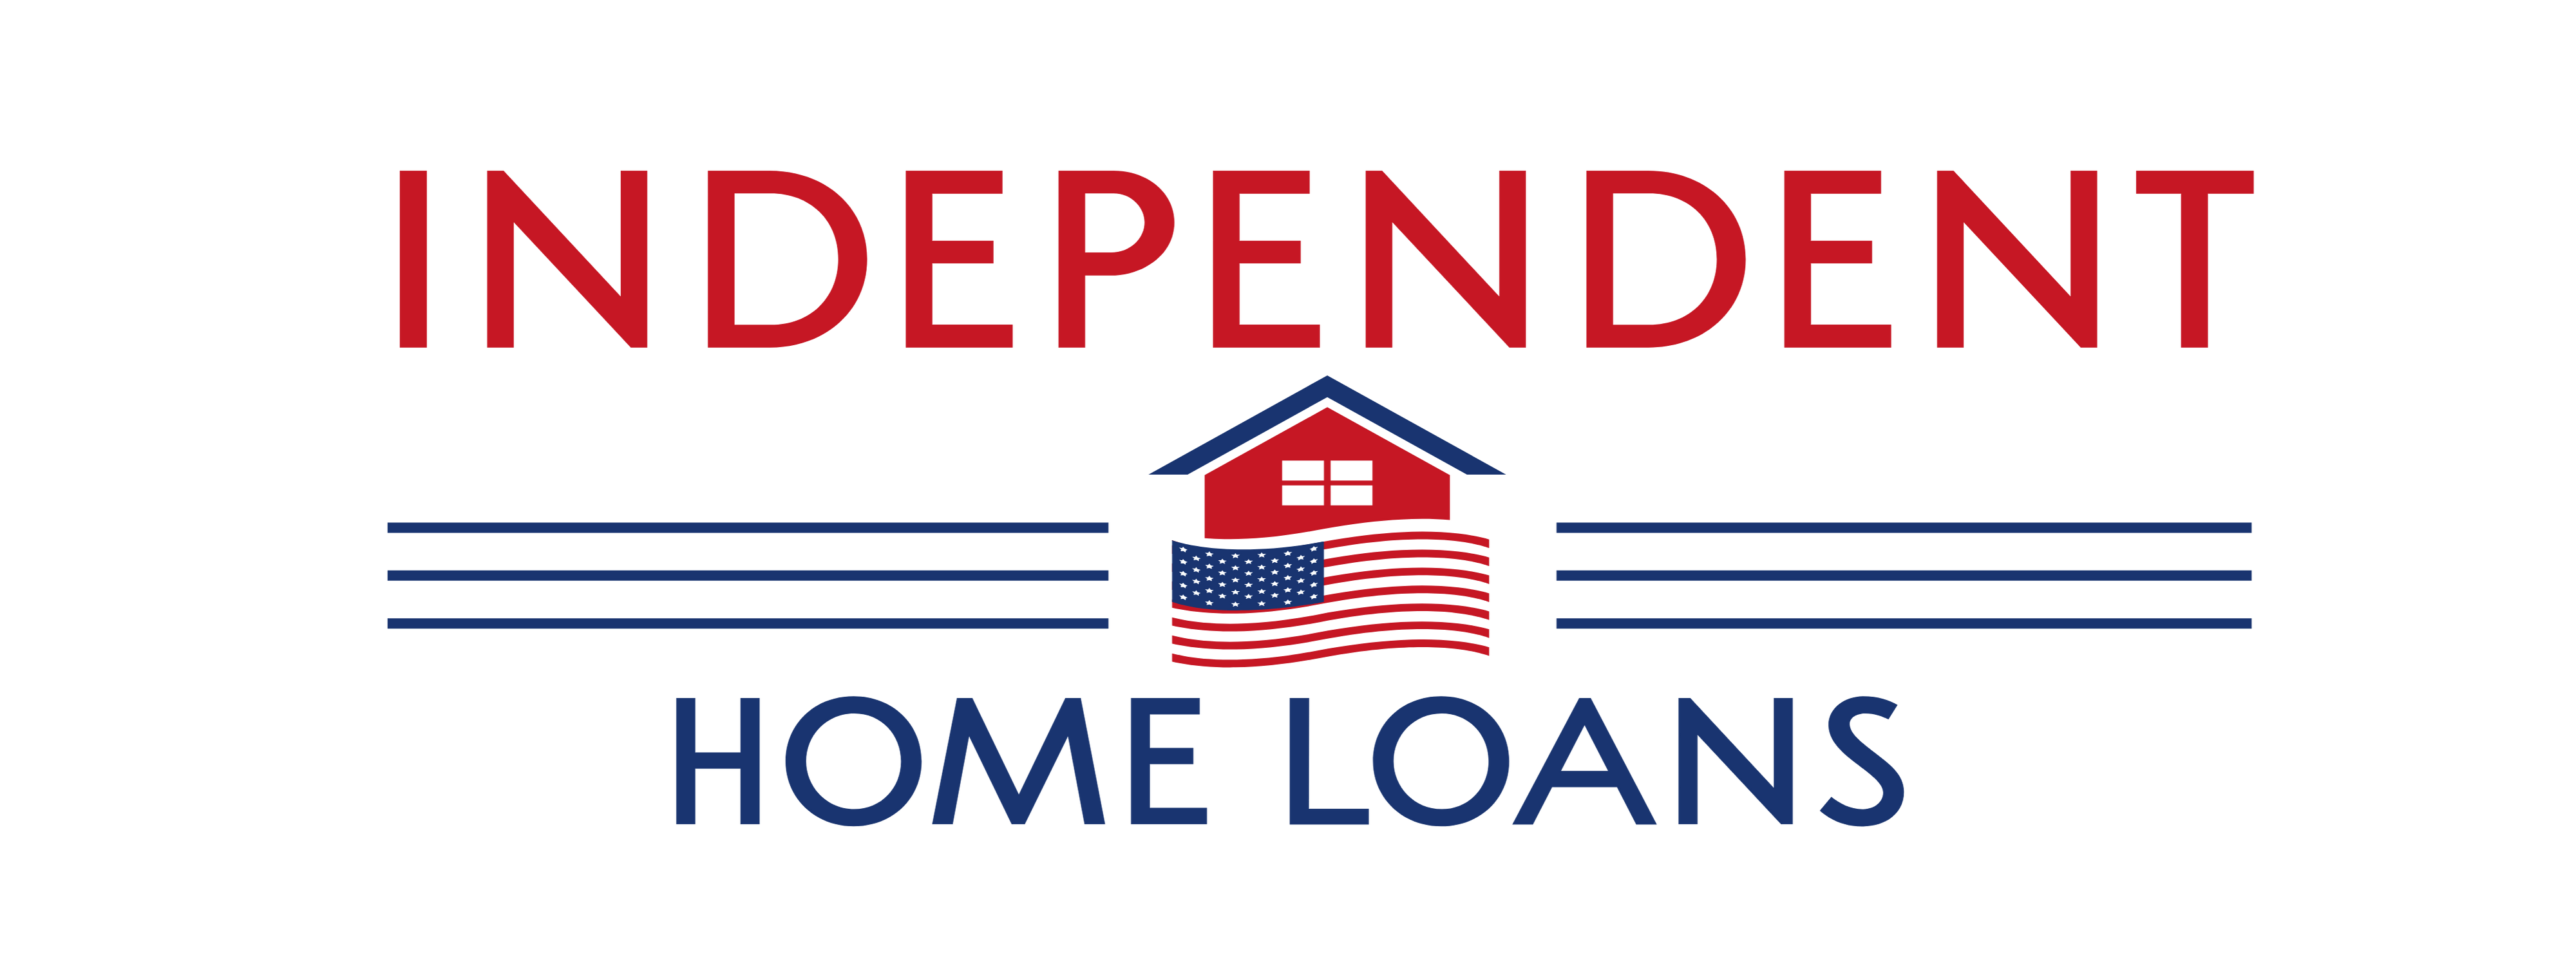 INDEPENDENT HOME LOANS